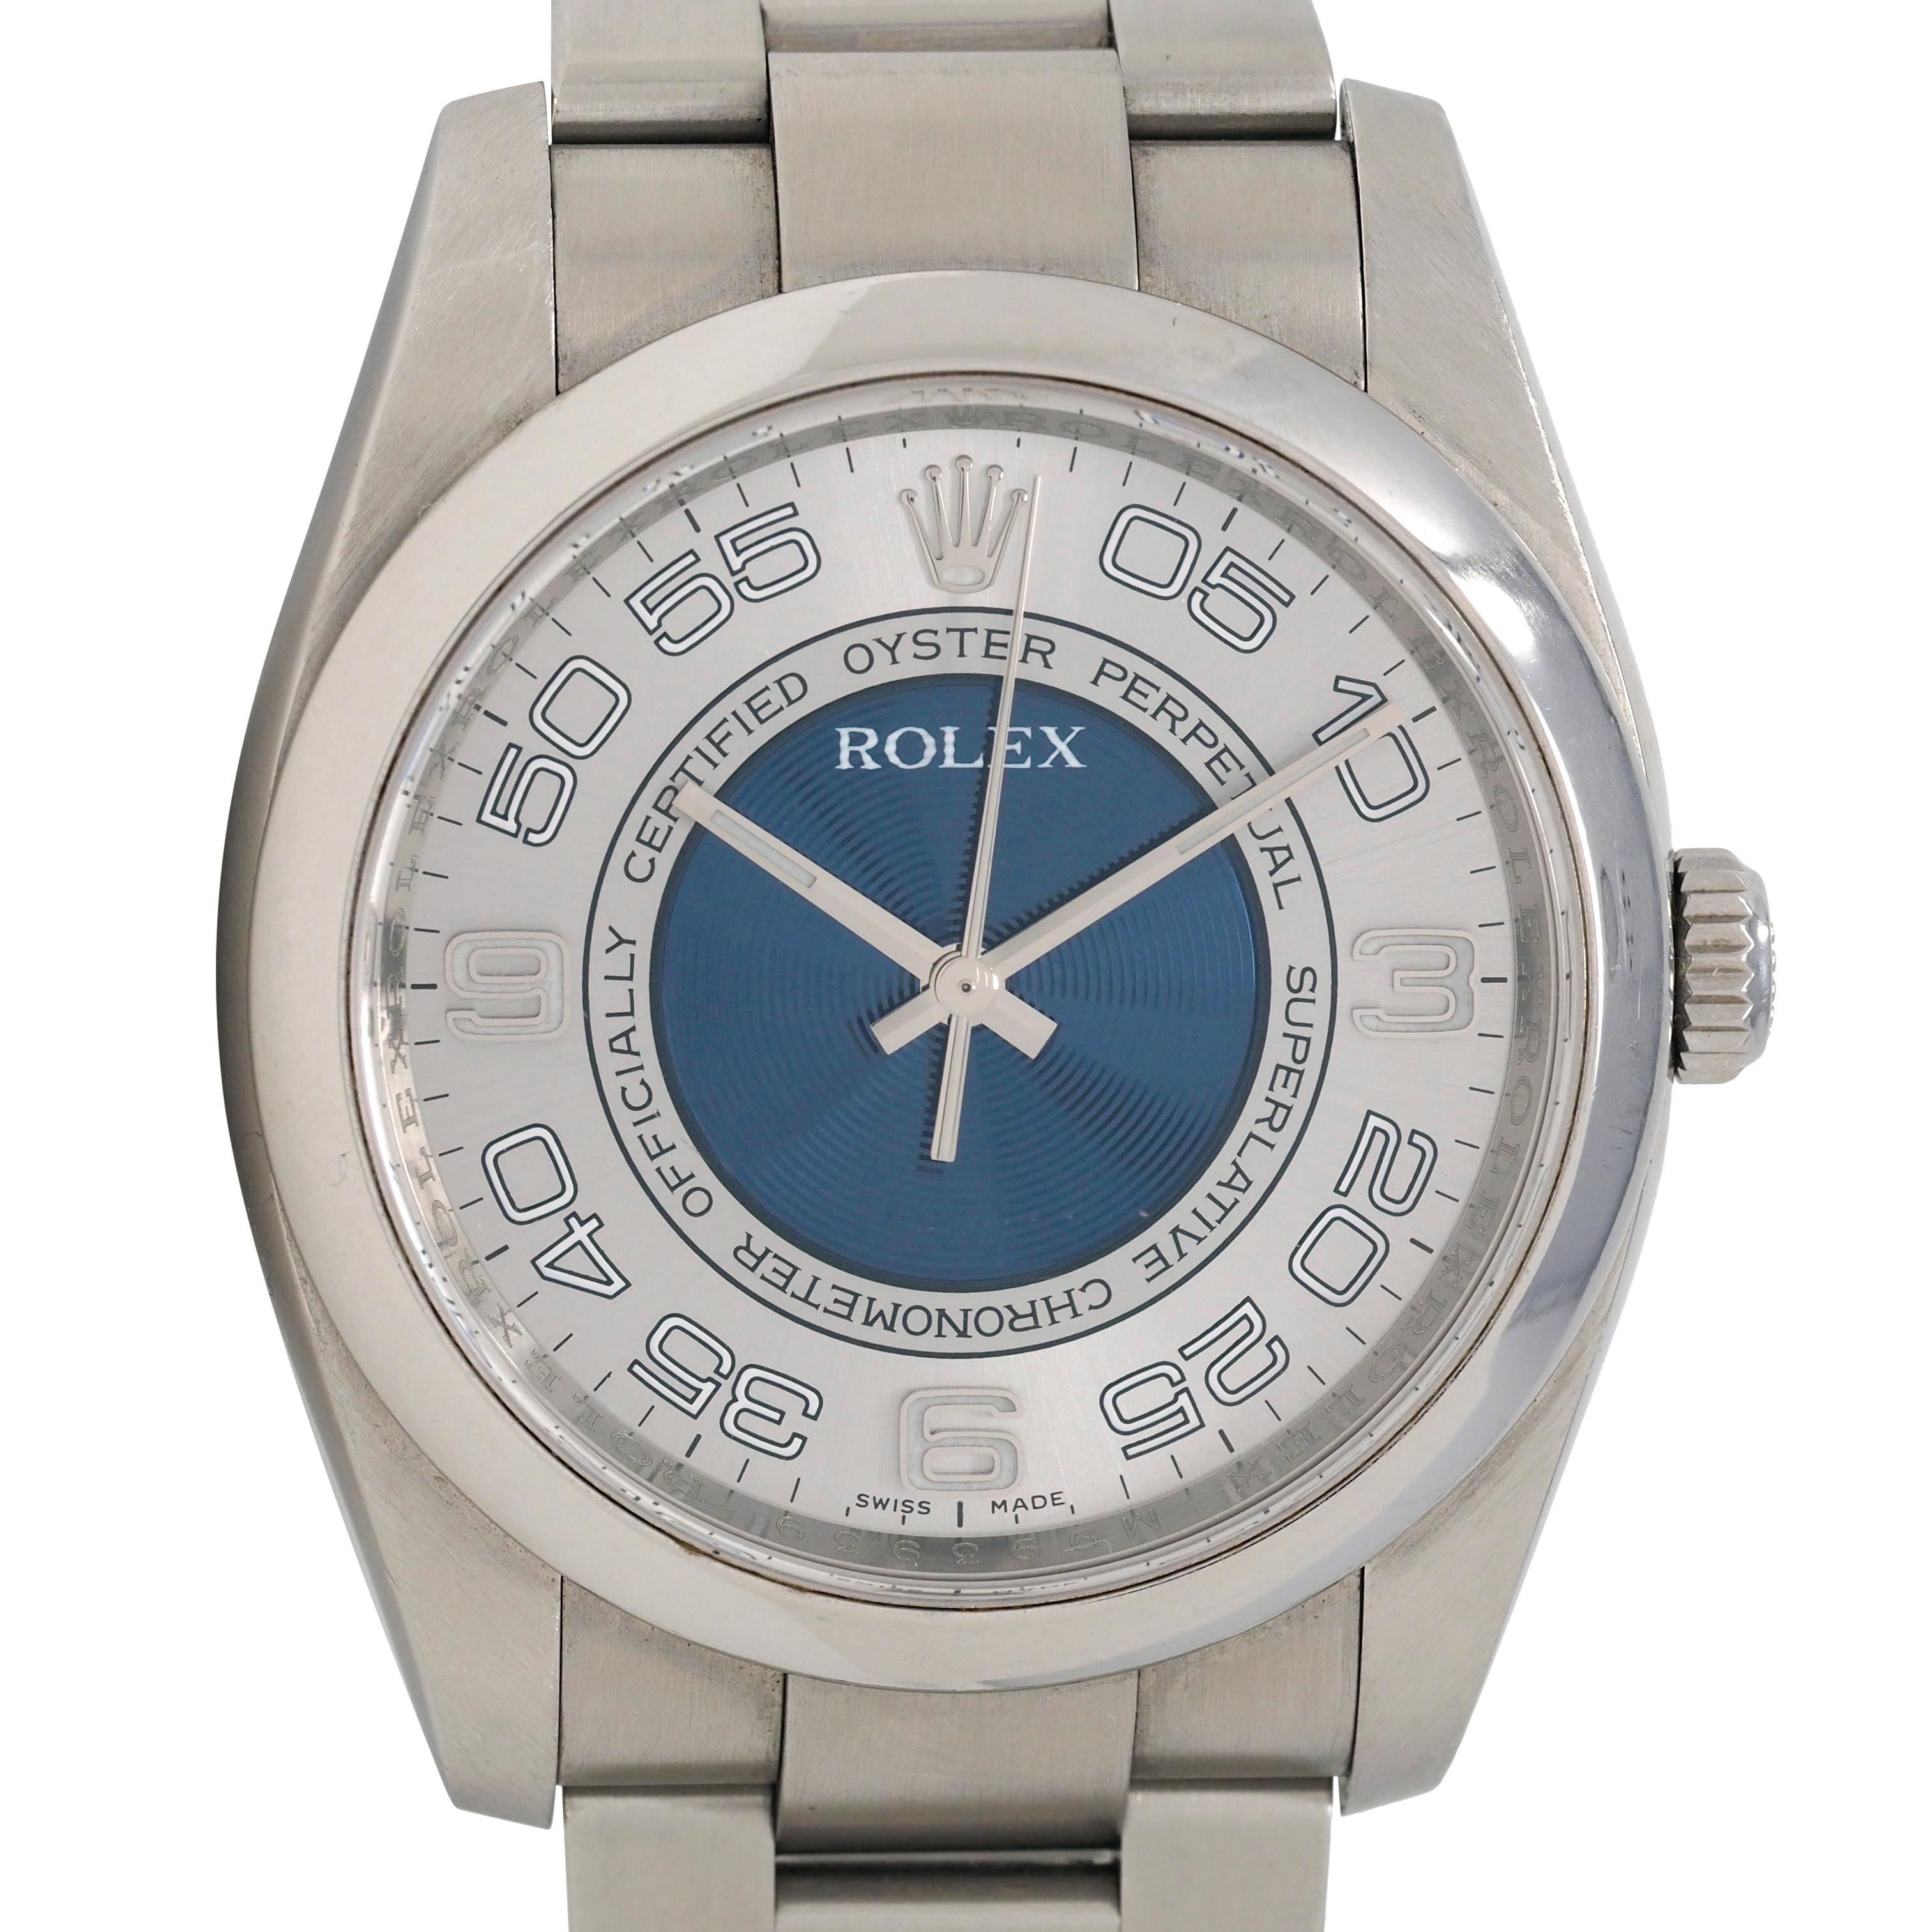 Centering a round silver and blue concentric dial watch face featuring white Arabic numerals 
With 'Rolex' and 'Swiss Made' Inscribed on face with raised logo and hidden logo halo
With glass cover and high polish bezel set in brushed stainless steel